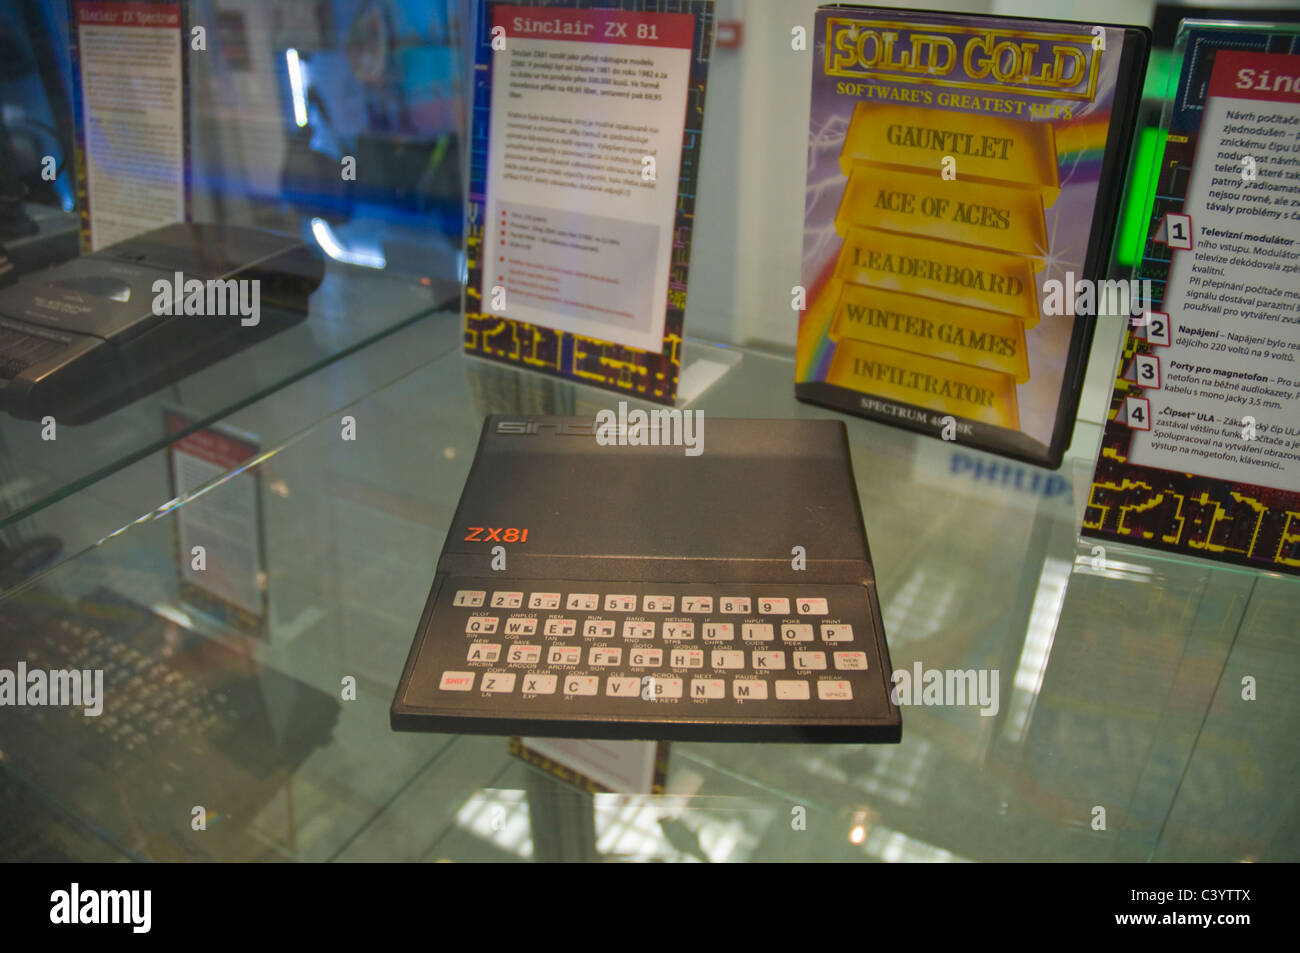 Sinclair ZX81 personal computer fromthe 1980s Stock Photo